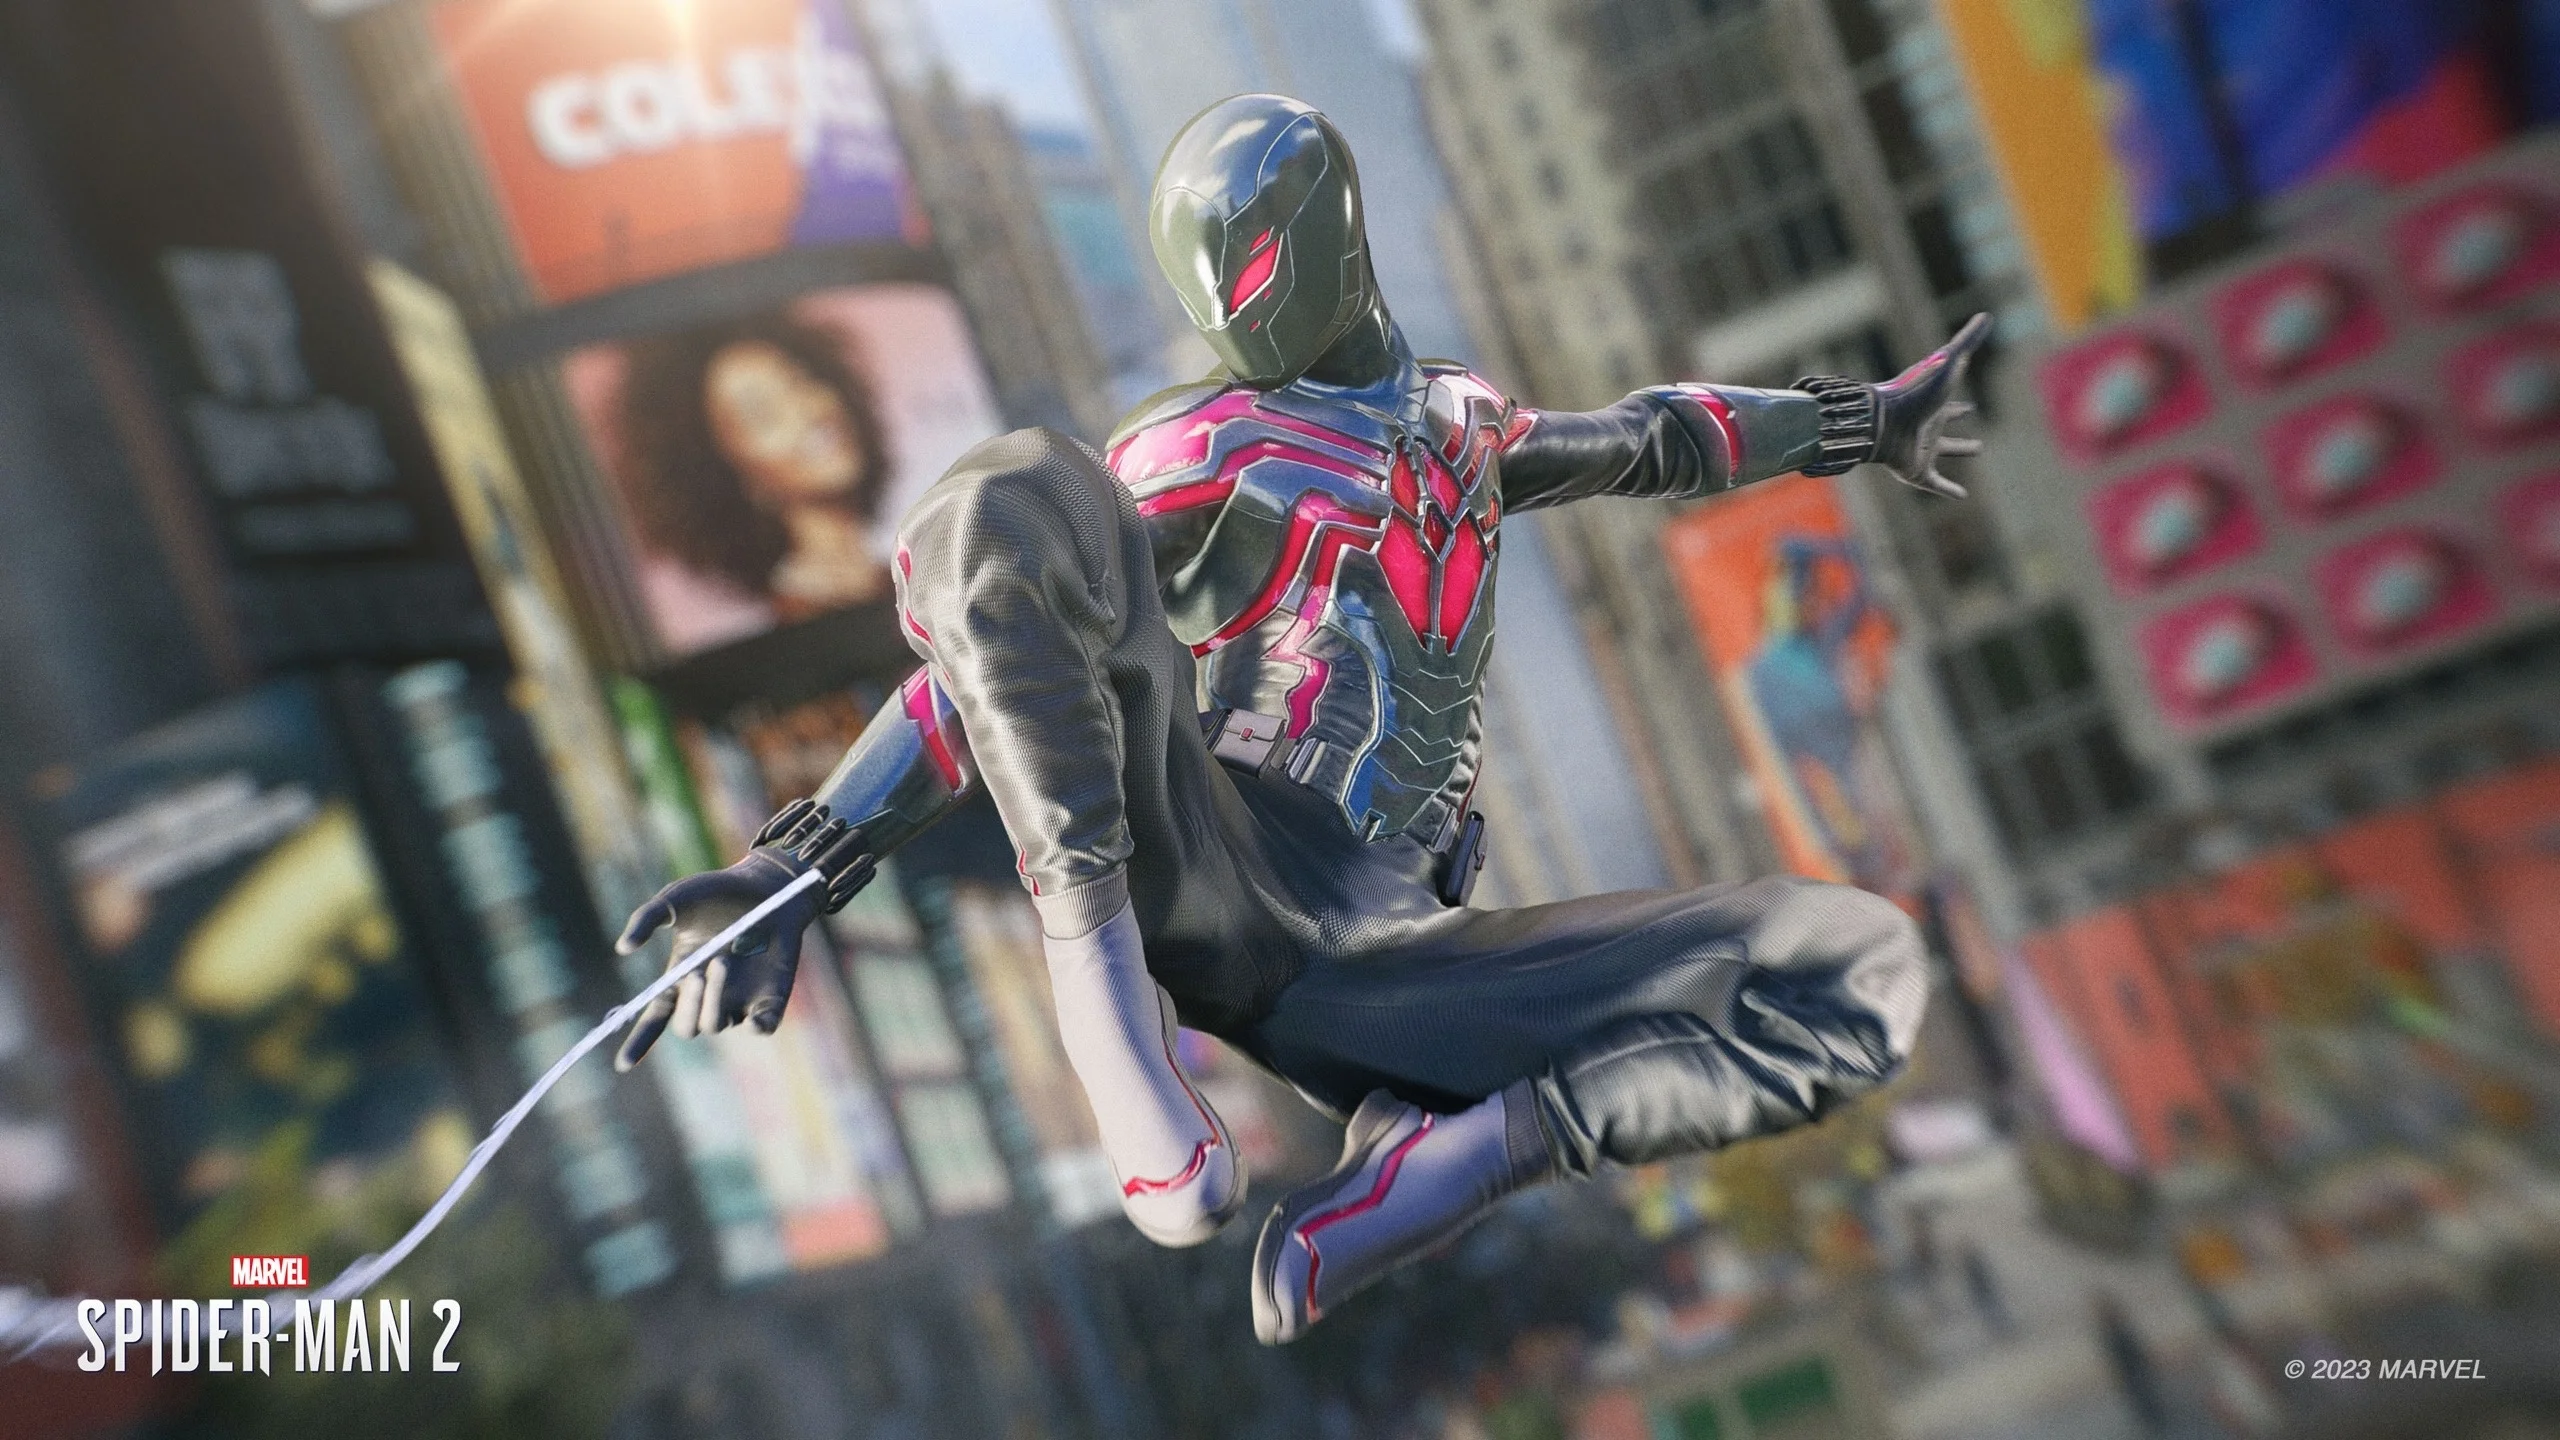 The developers of Marvel's Spider-Man 2 showed two new costumes